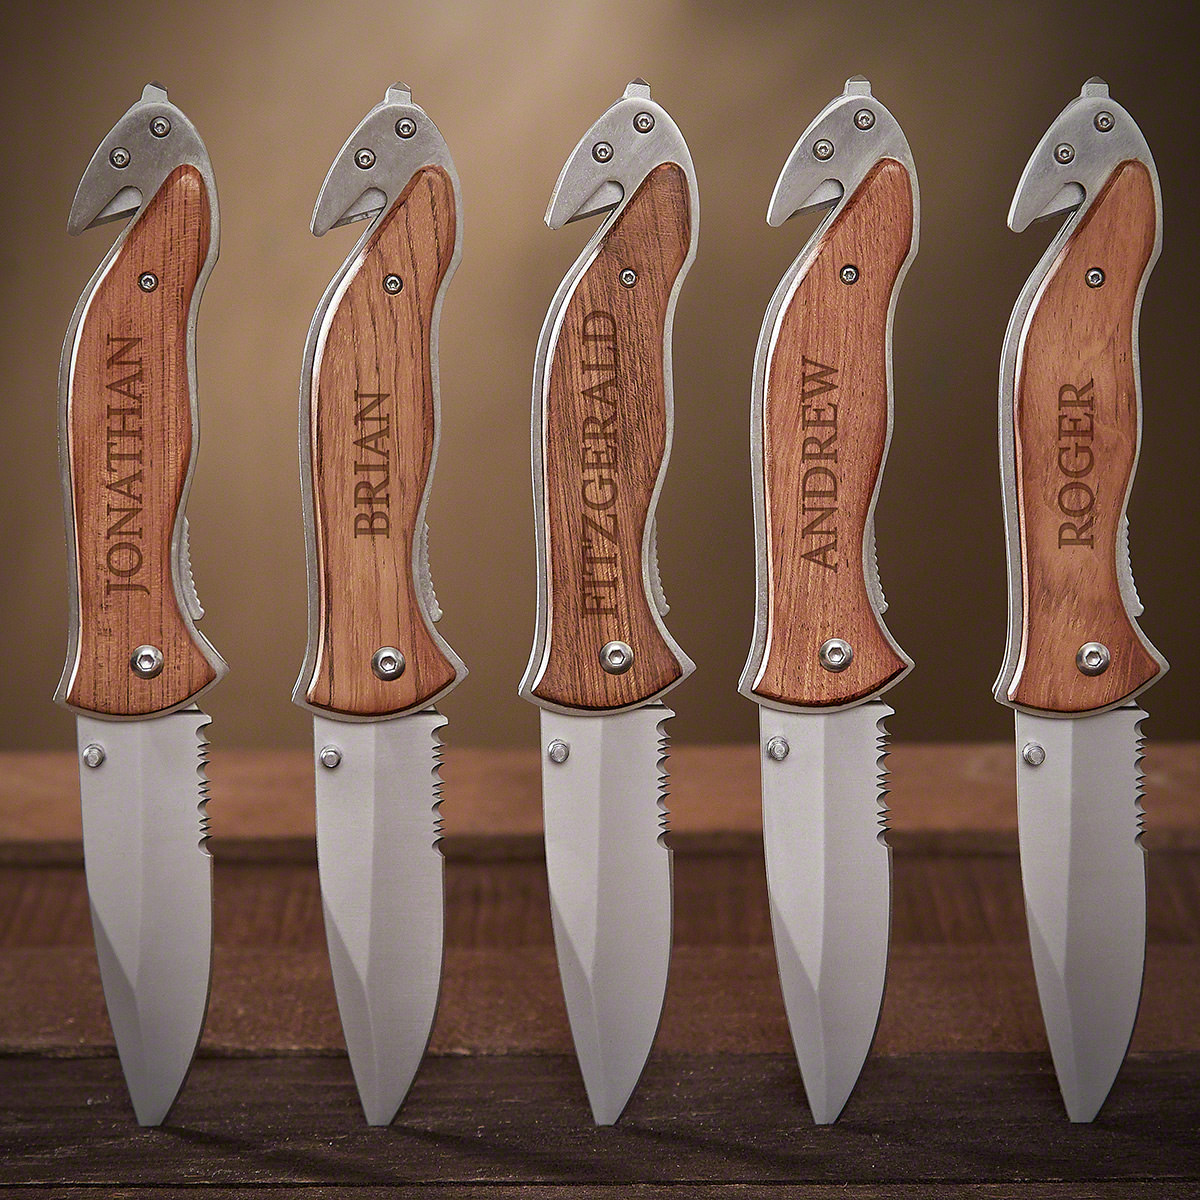 Serrated Personalized Knife Gift for Groomsmen Set of 5